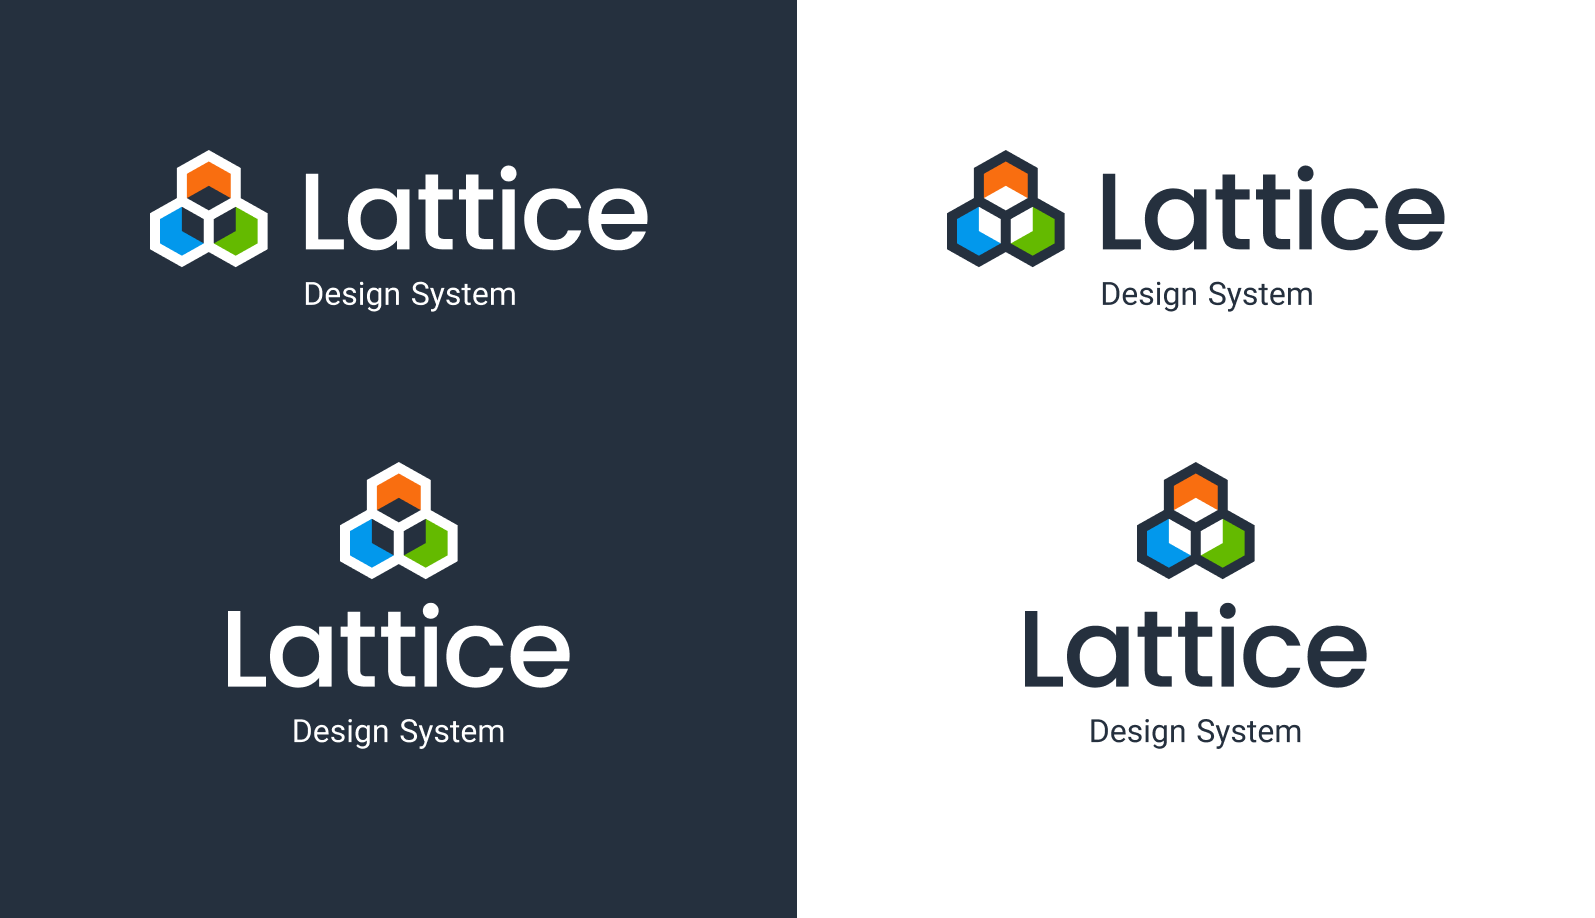 Horizontal and stacked logos for Lattice, Honeycomb’s new design system.